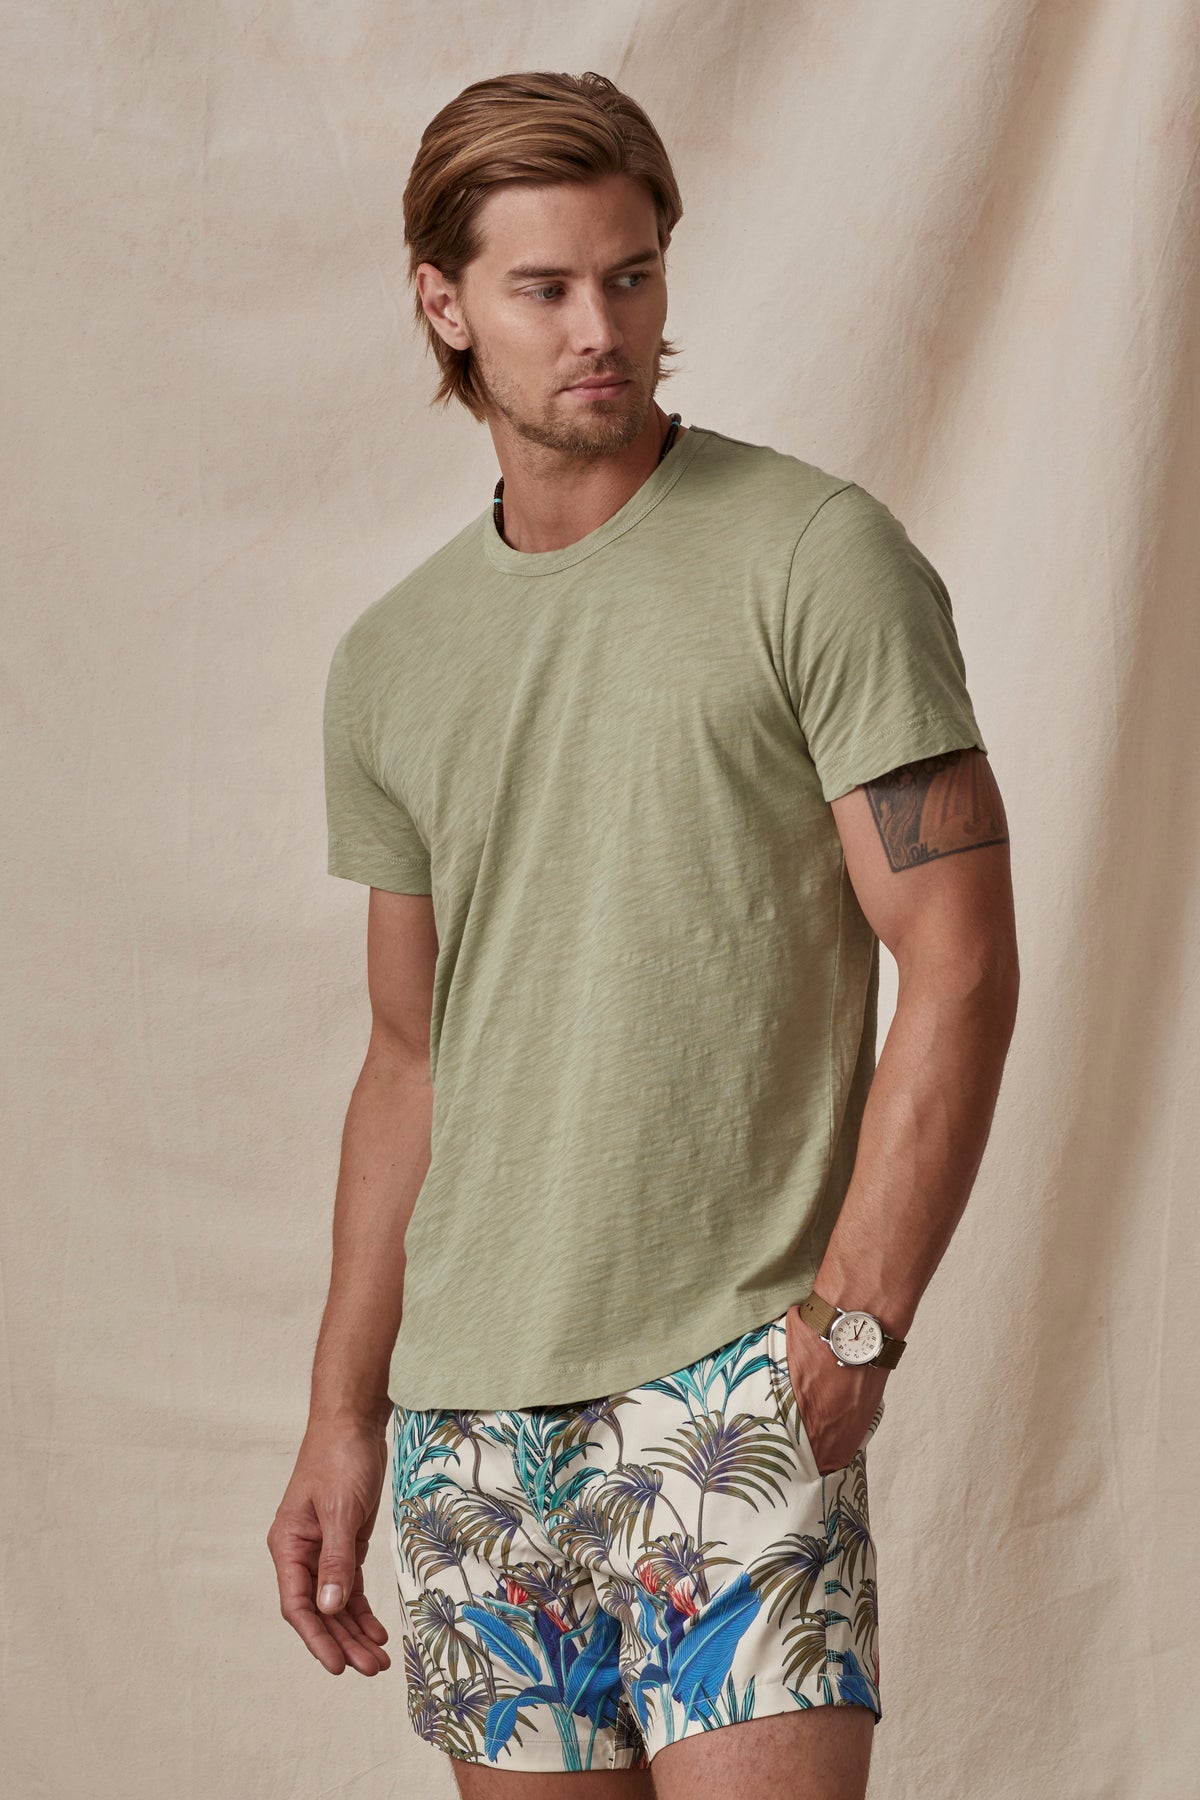 A man in a green Velvet by Graham & Spencer AMARO TEE and tropical print shorts standing against a beige backdrop. He is also wearing a watch.-36752671539393